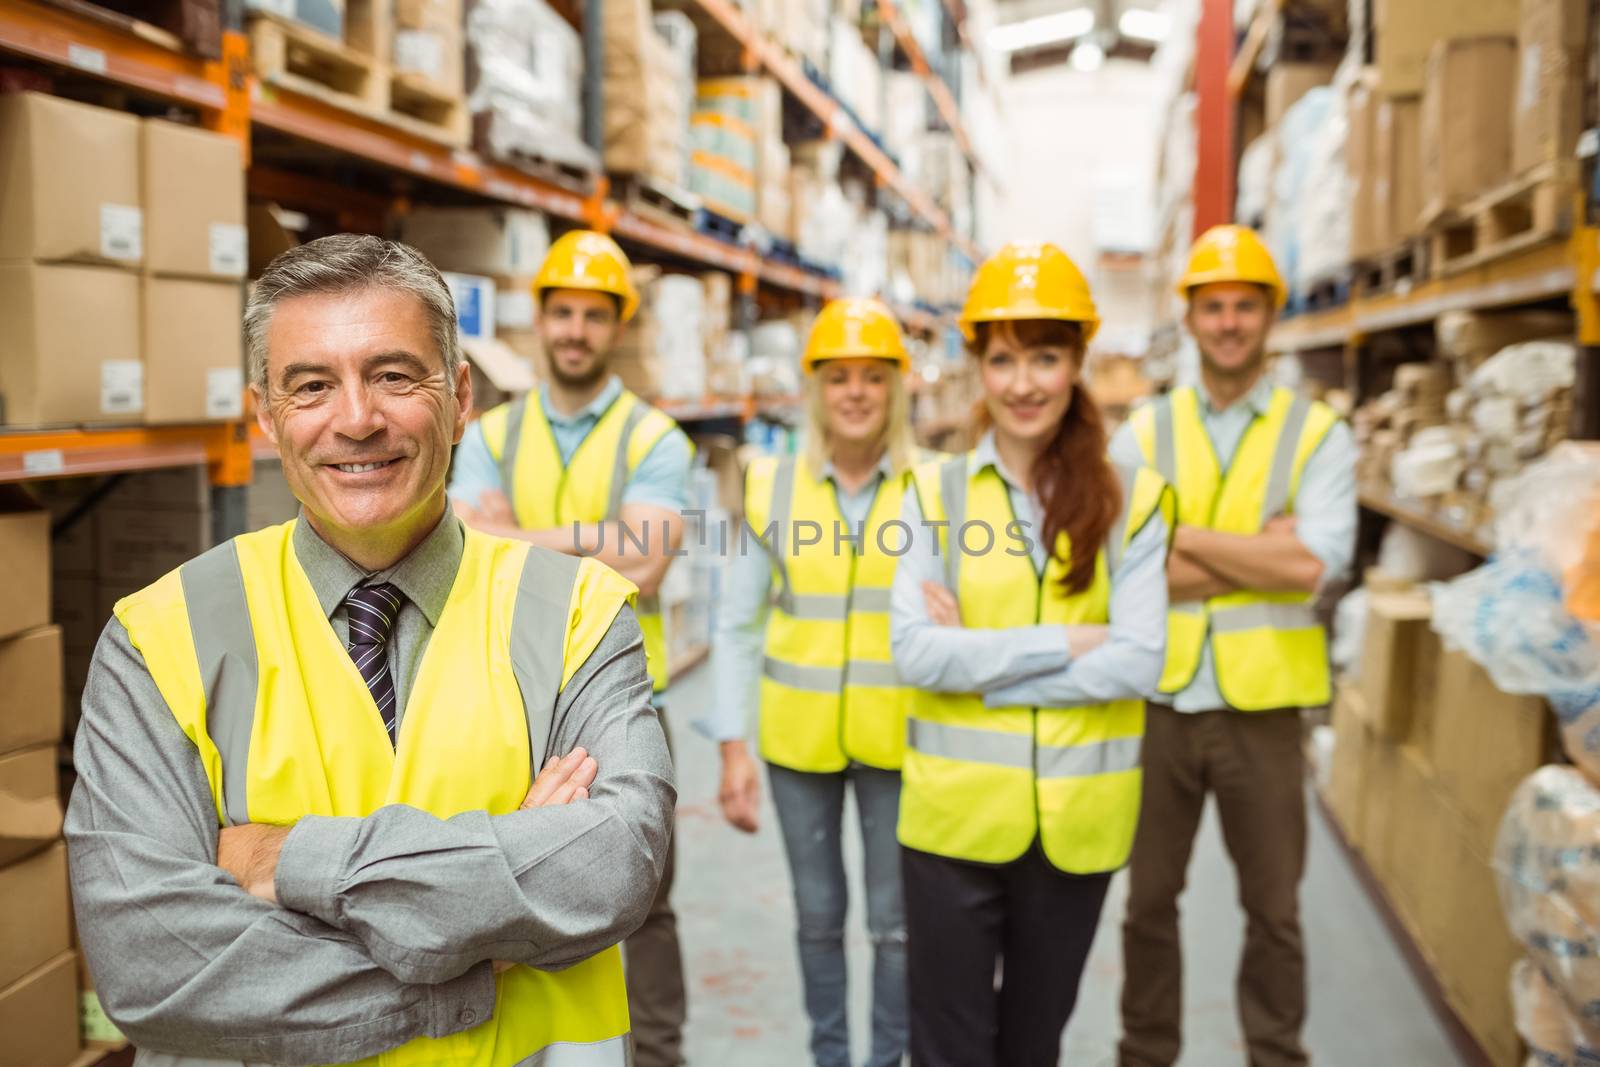 Smiling warehouse team with arms crossed in a large warehouse